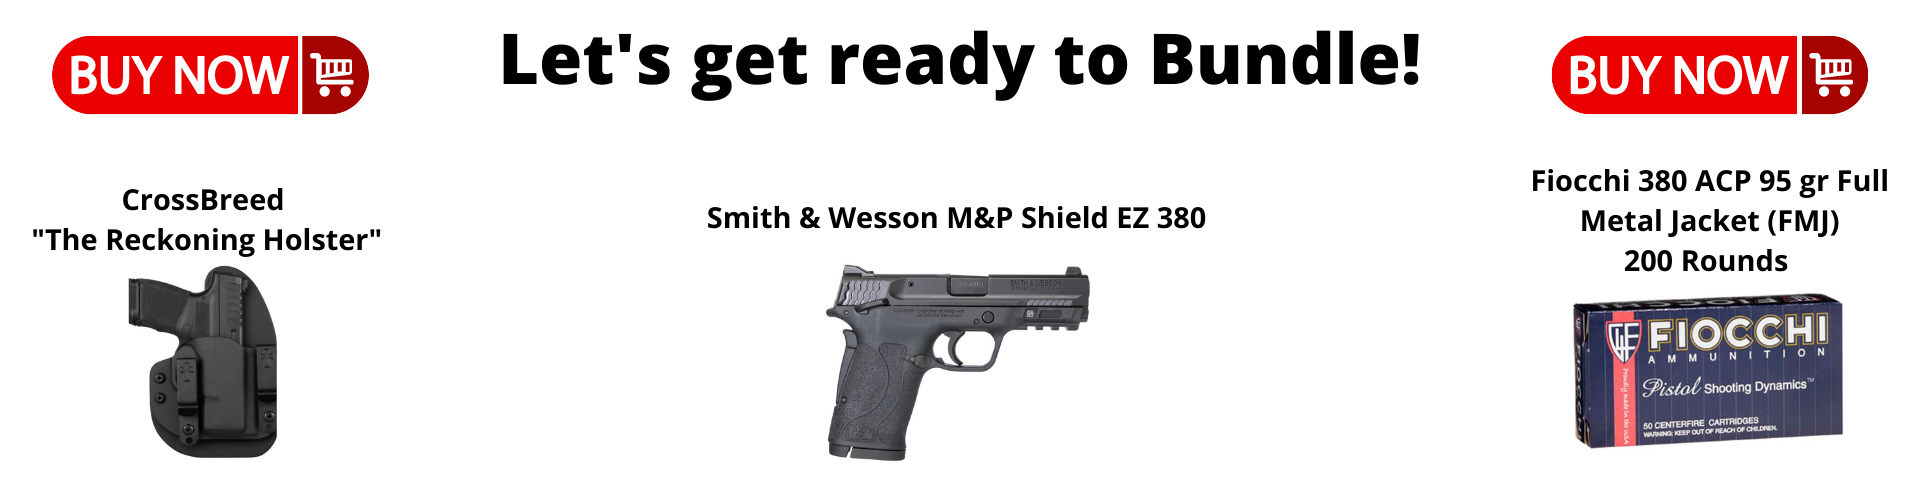 https://www.actionarmory.com/products/smith-wesson-022188869743-2812